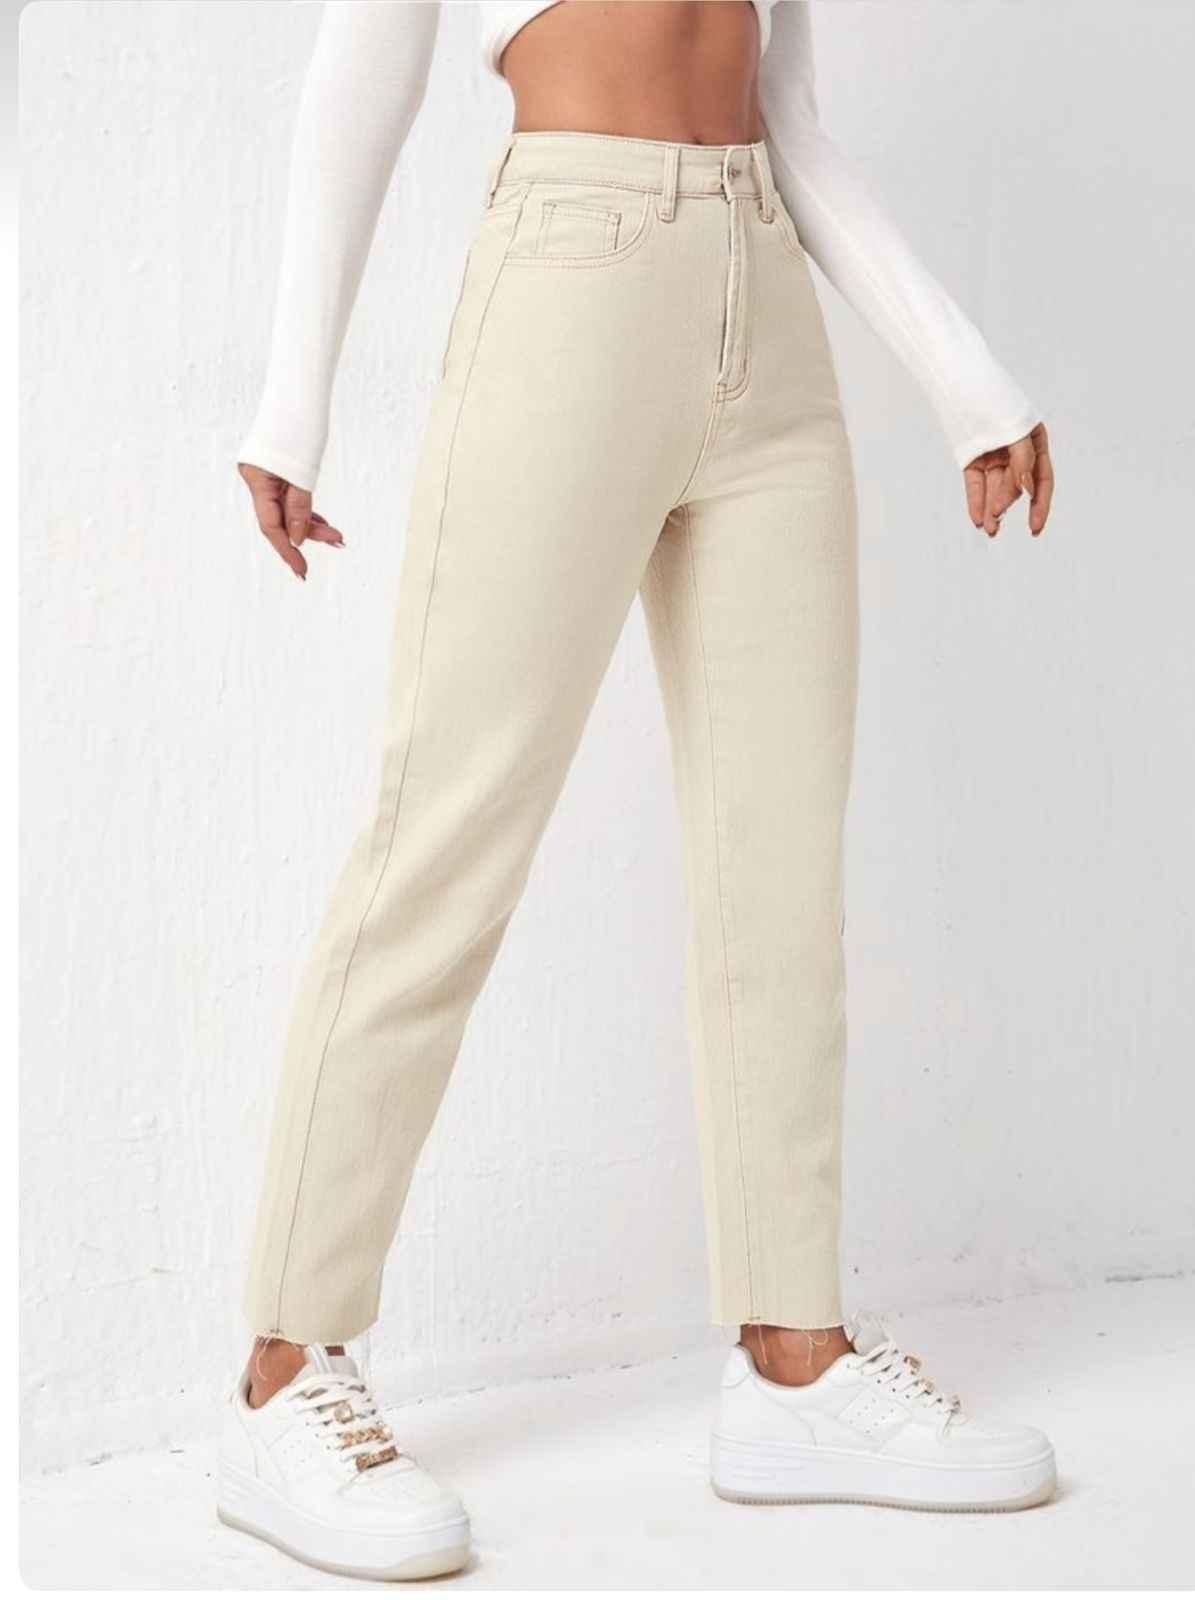 Ceammy Unique Causal Straight Mom Fit Jeans for Women's